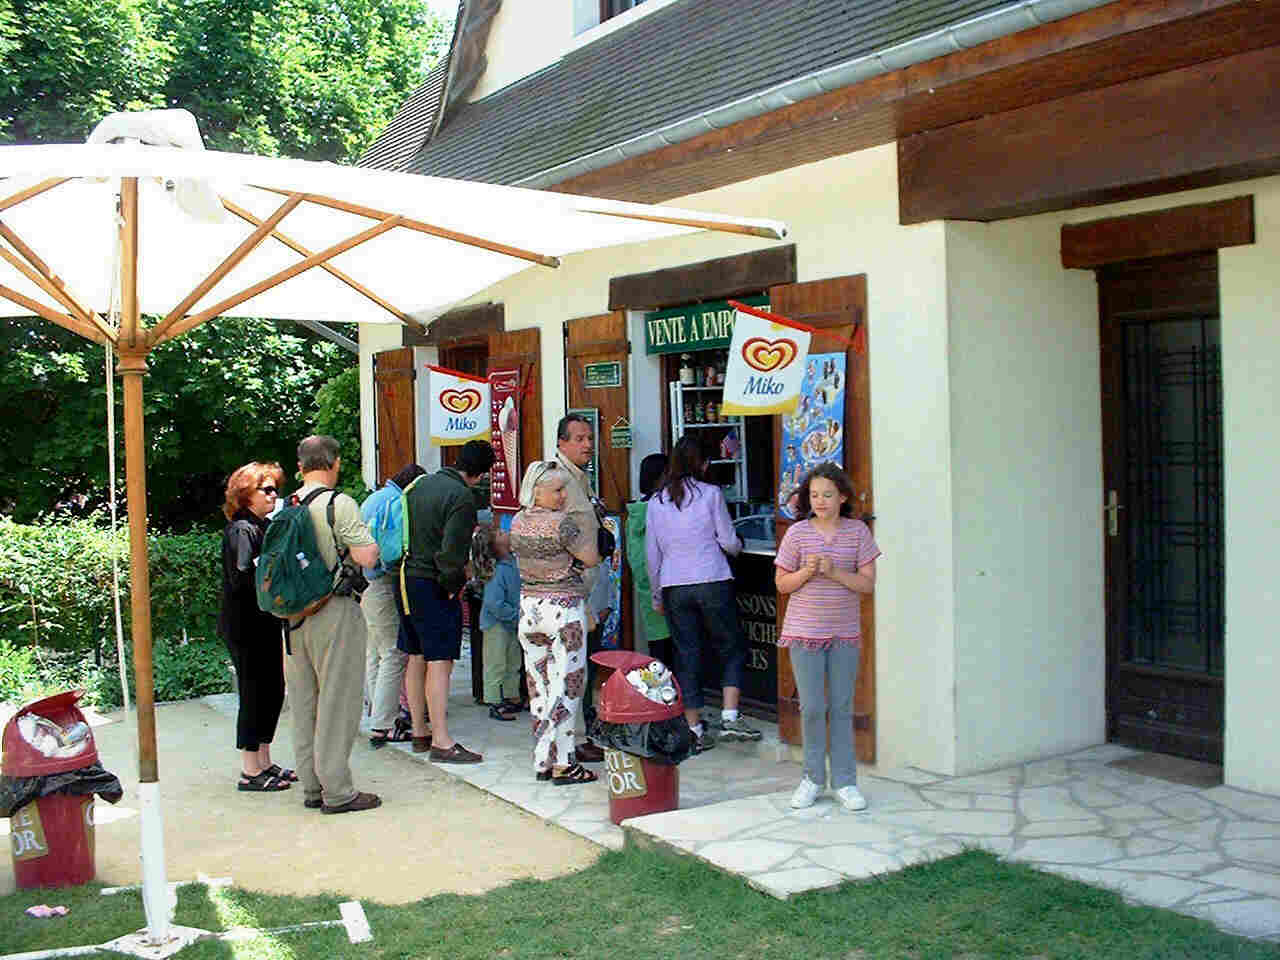 Take-out stand, Monet's Garden